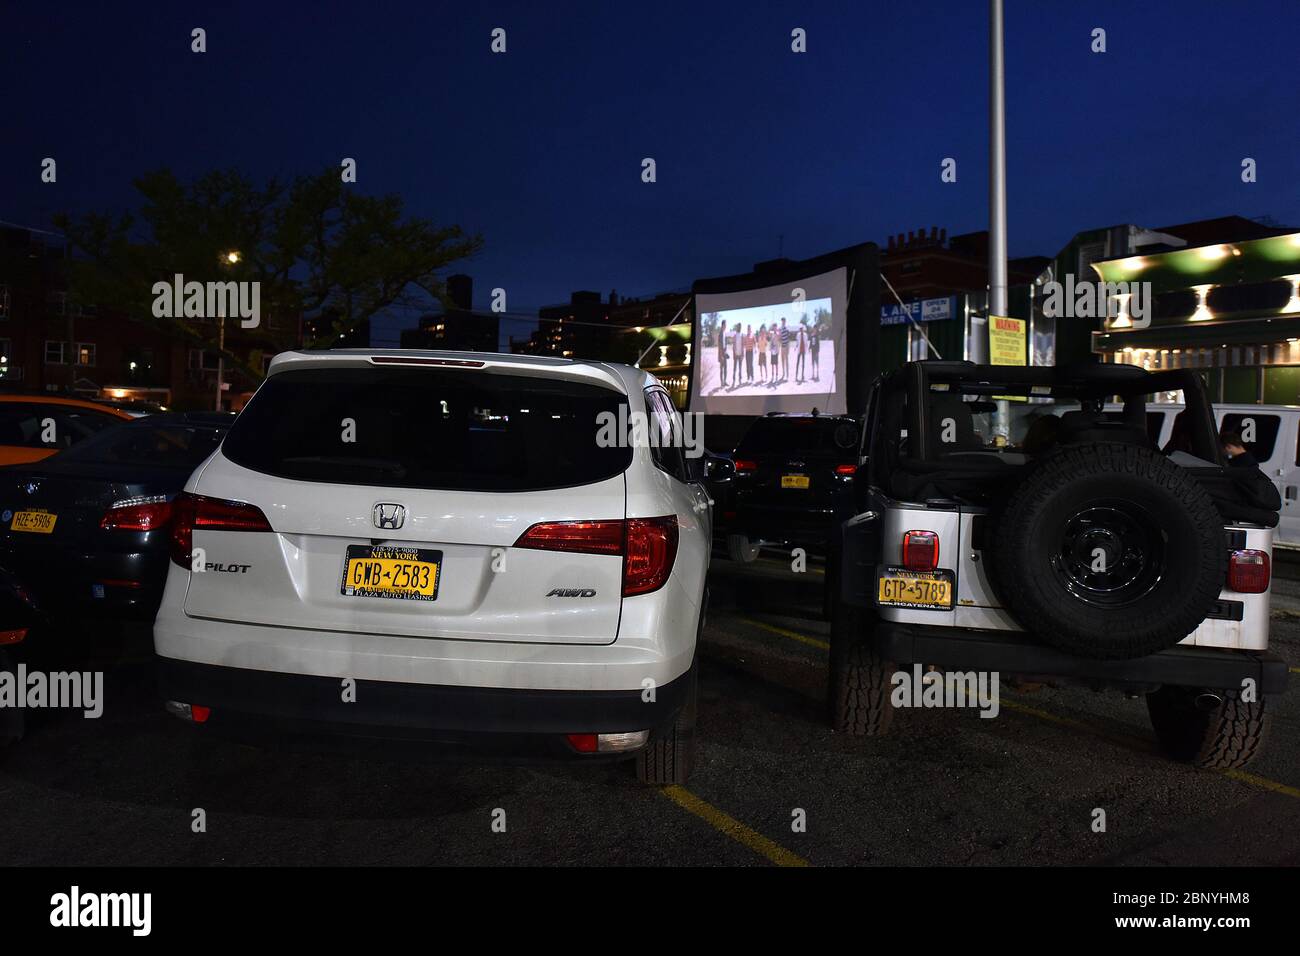 New York City, USA. 16th May, 2020. Bel Aire Diner in the Astoria neighborhood of Queens, has been transformed into a drive-in movie theatre during the COVID-19 pandemic, New York, NY, May 16, 2020. With restaurants limited to take-out under Coronavirus city rules, Bel Aire Diner allows motorist who reserved spots in their parking lot to order from the diner as they watch a movie. (Anthony Behar/Sipa USA) Credit: Sipa USA/Alamy Live News Stock Photo